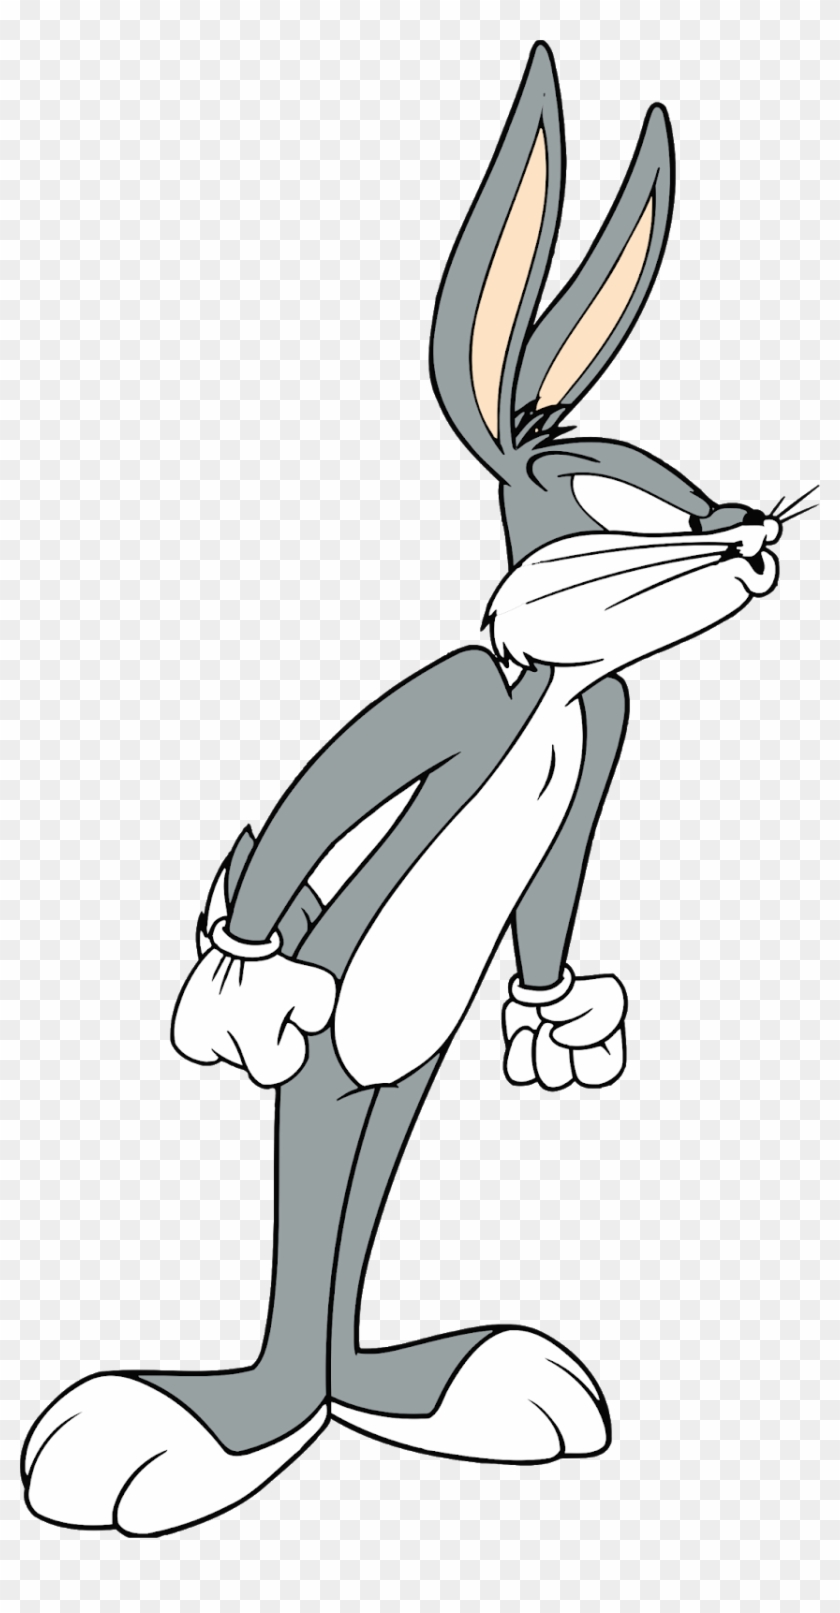 Bugs Bunny Characters, Bugs Bunny Cartoon Characters, - Bugs Bunny Clipart Png Transparent Png #855469